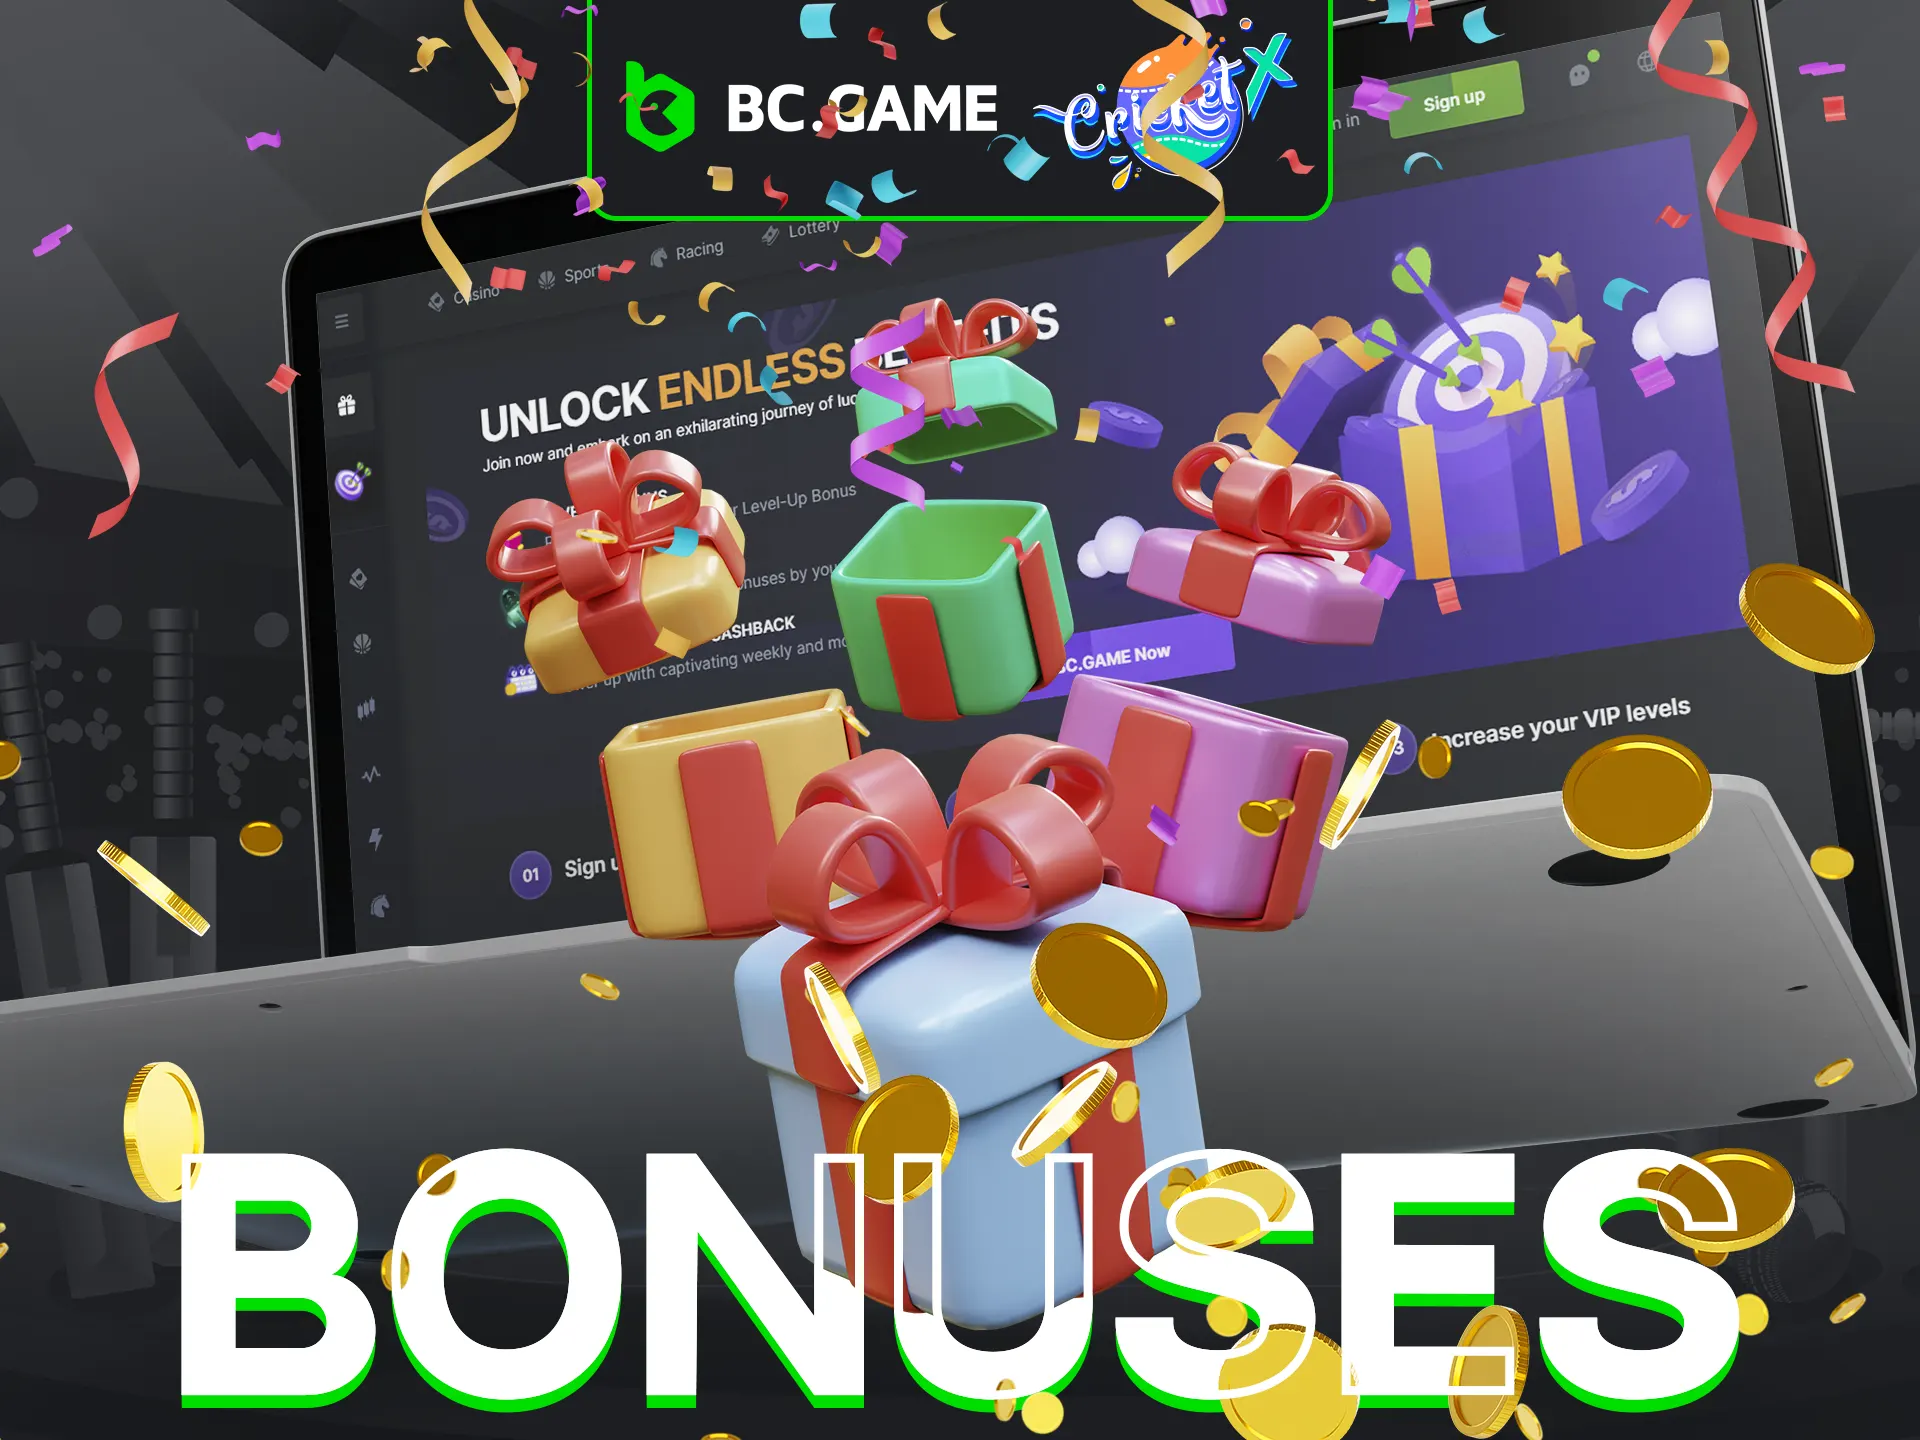 BC Game rewards players with generous bonuses, up to 300%.